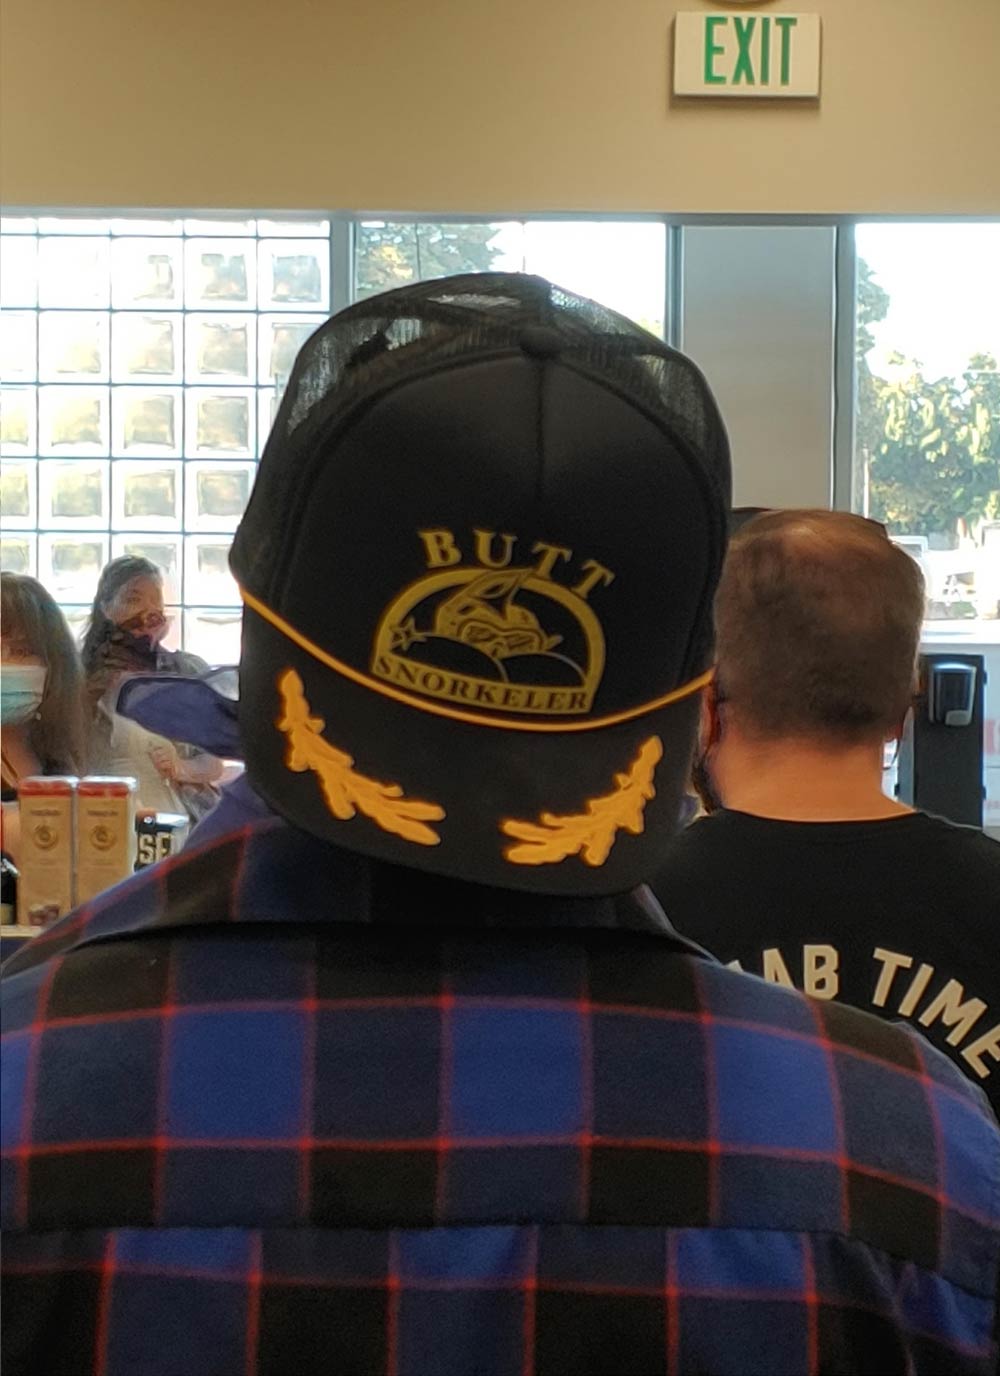 Caught this hat in line getting booze